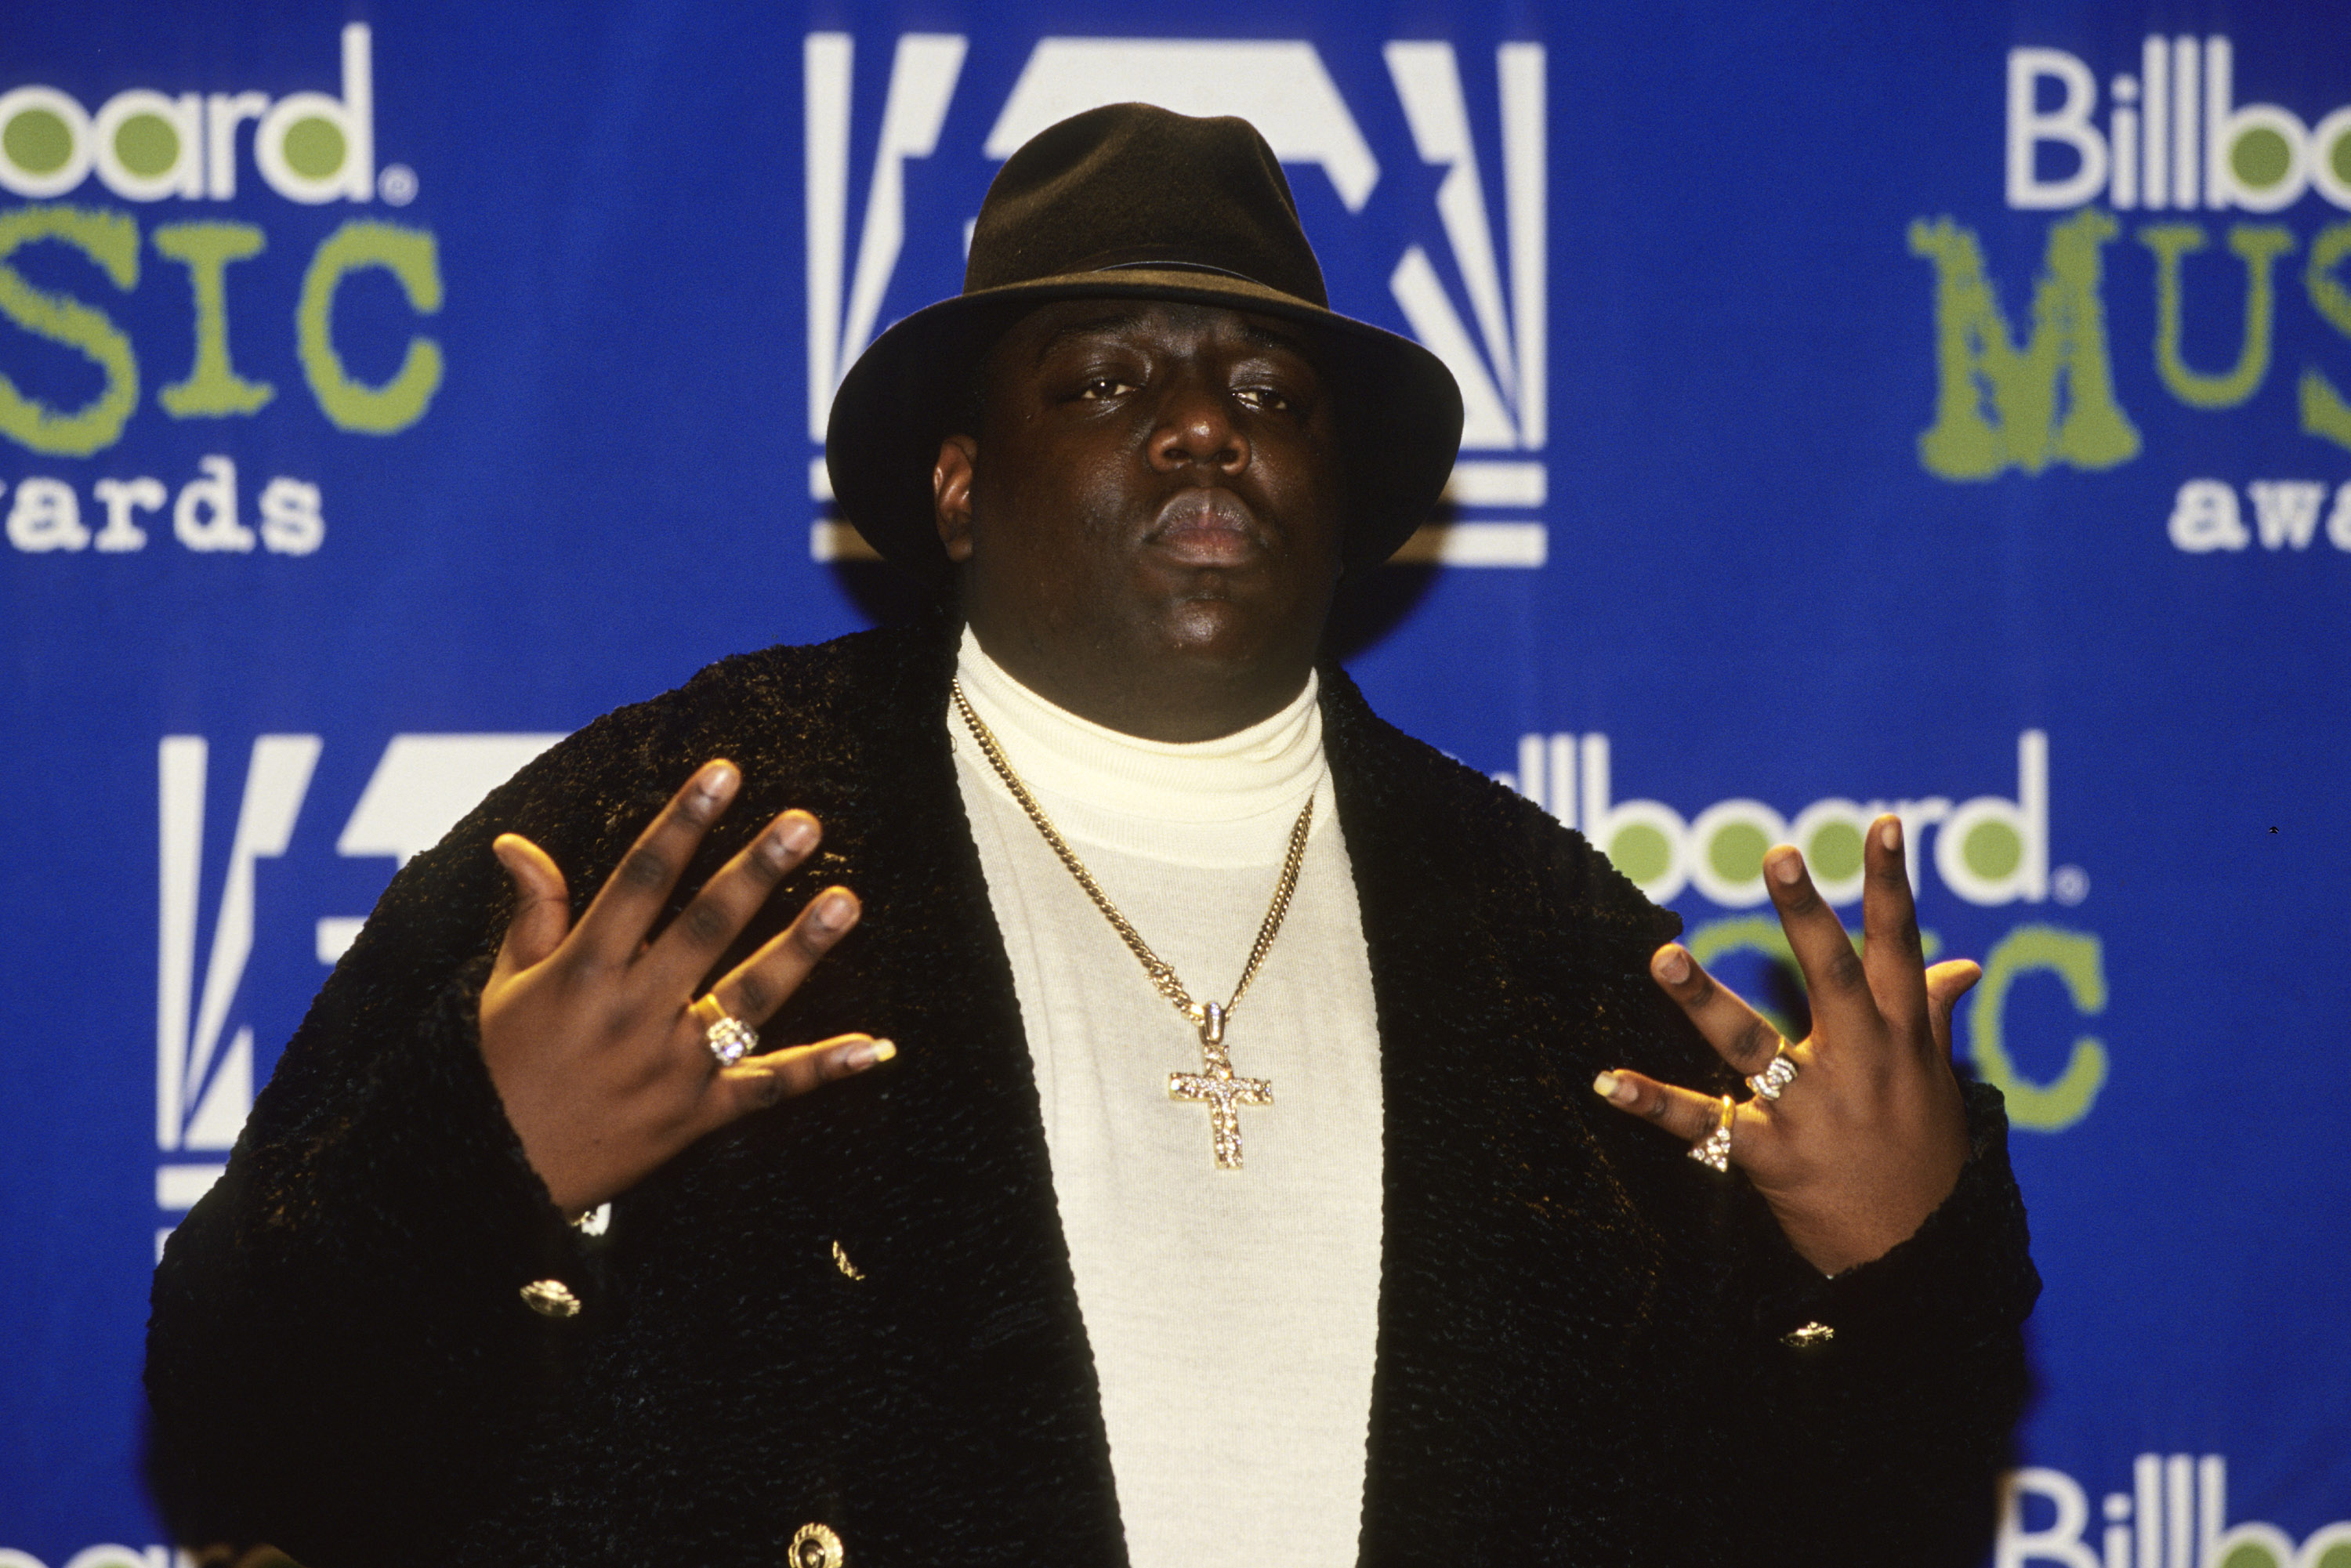 The Notorious B.I.G. wearing a hat